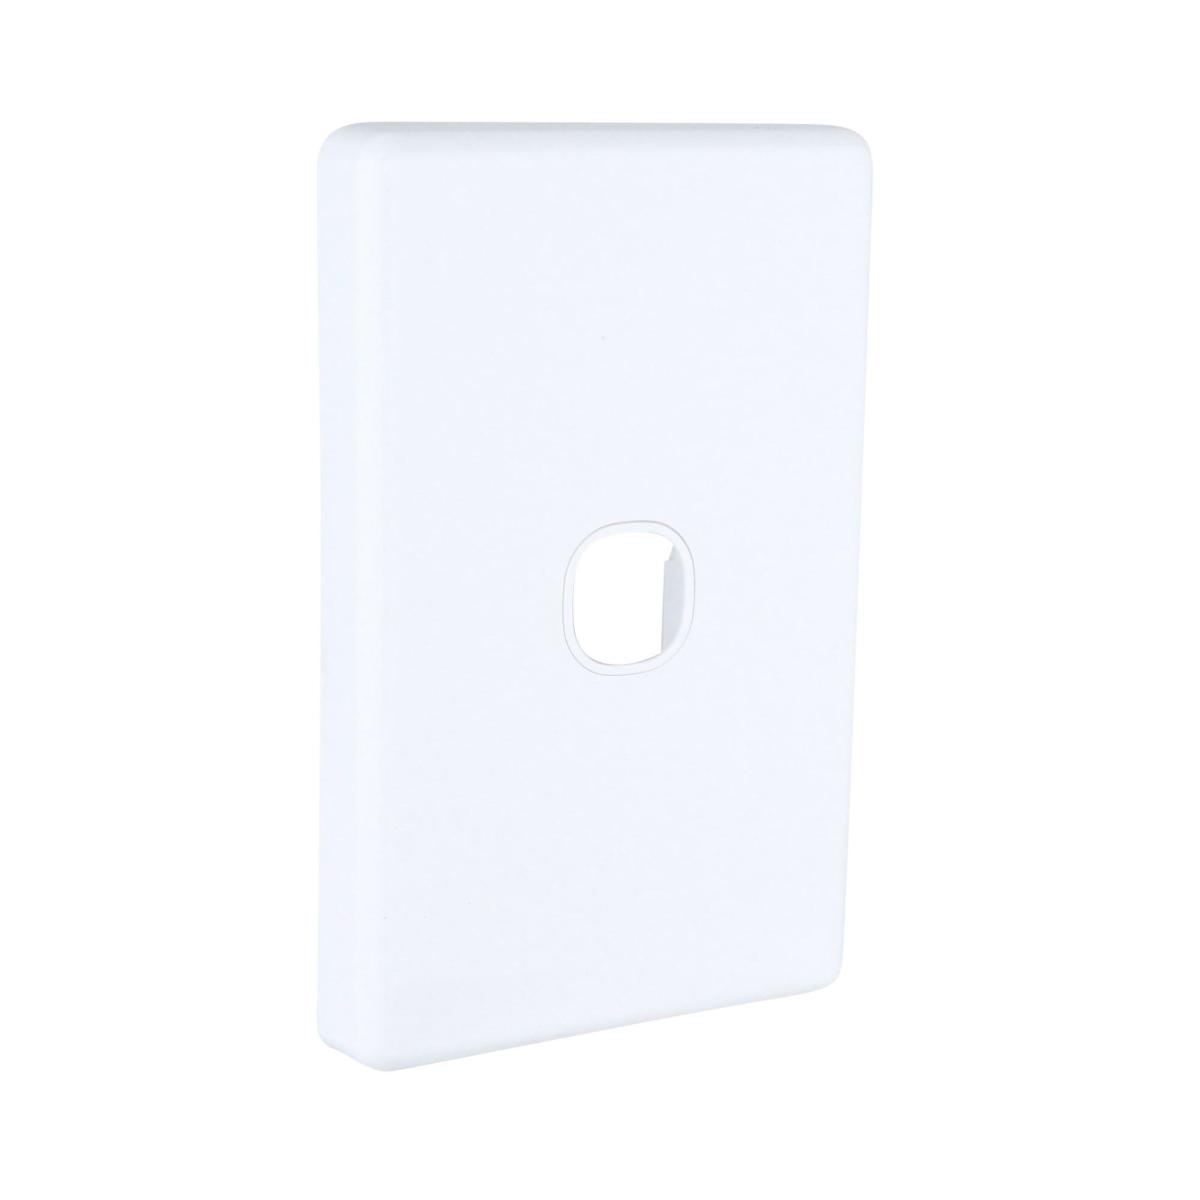 PLATE GRID & COVER 1 GANG WHITE